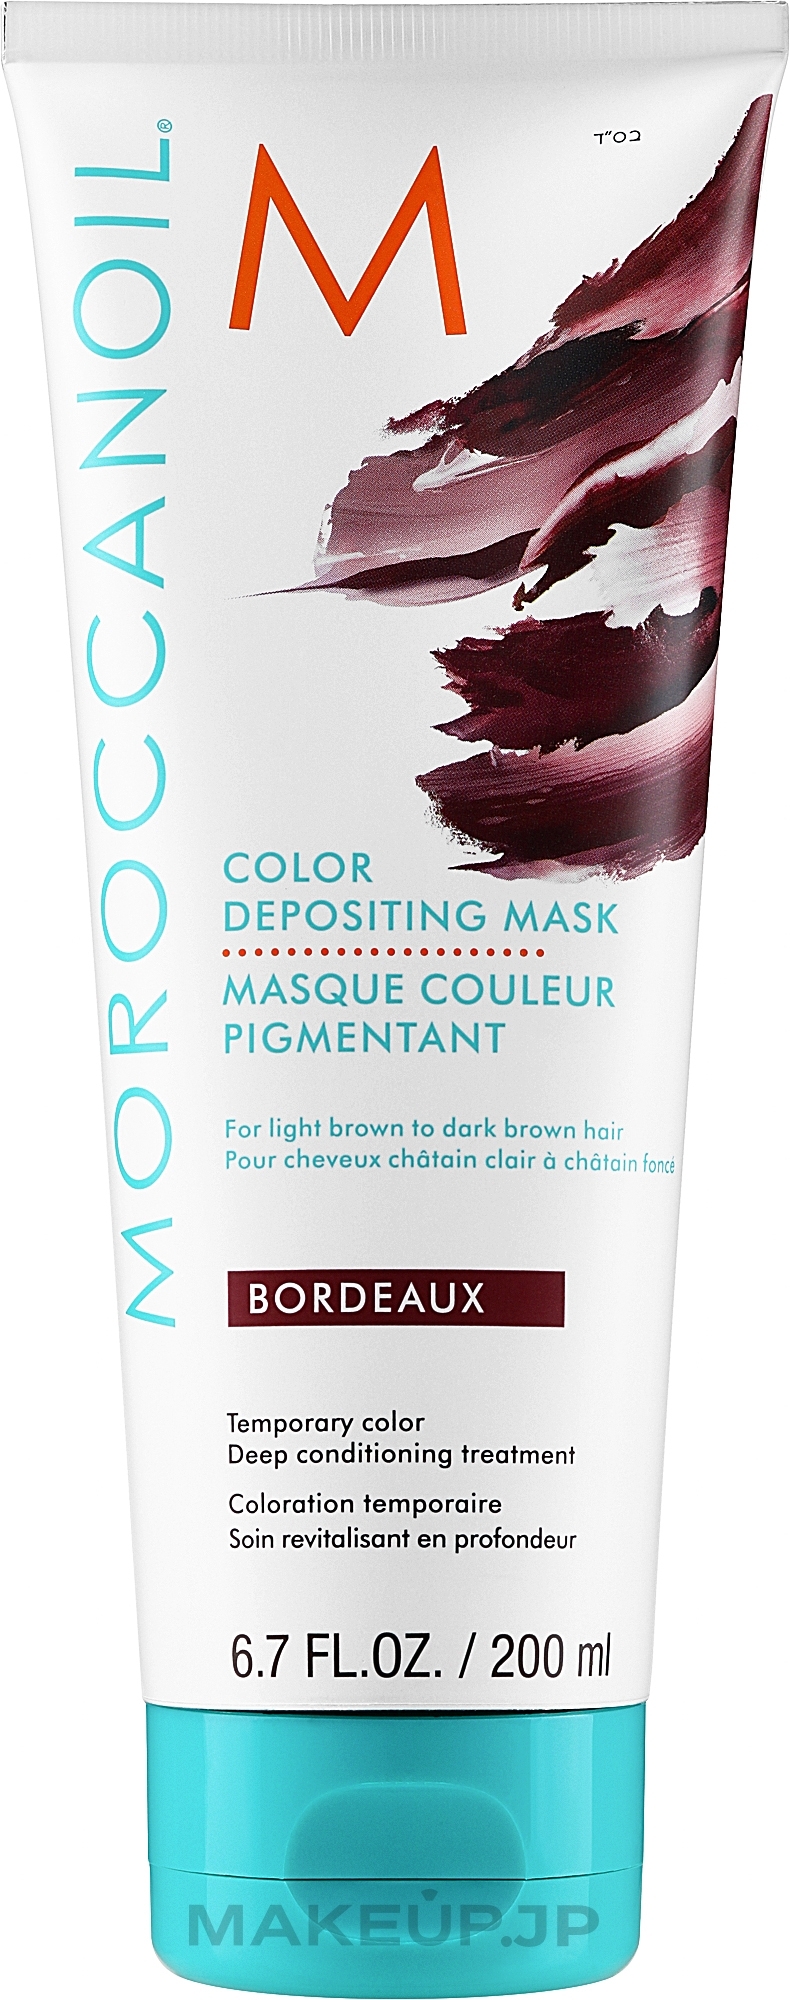 Tinting Hair Mask, 200 ml - MoroccanOil Color Depositing Mask — photo Bordeaux